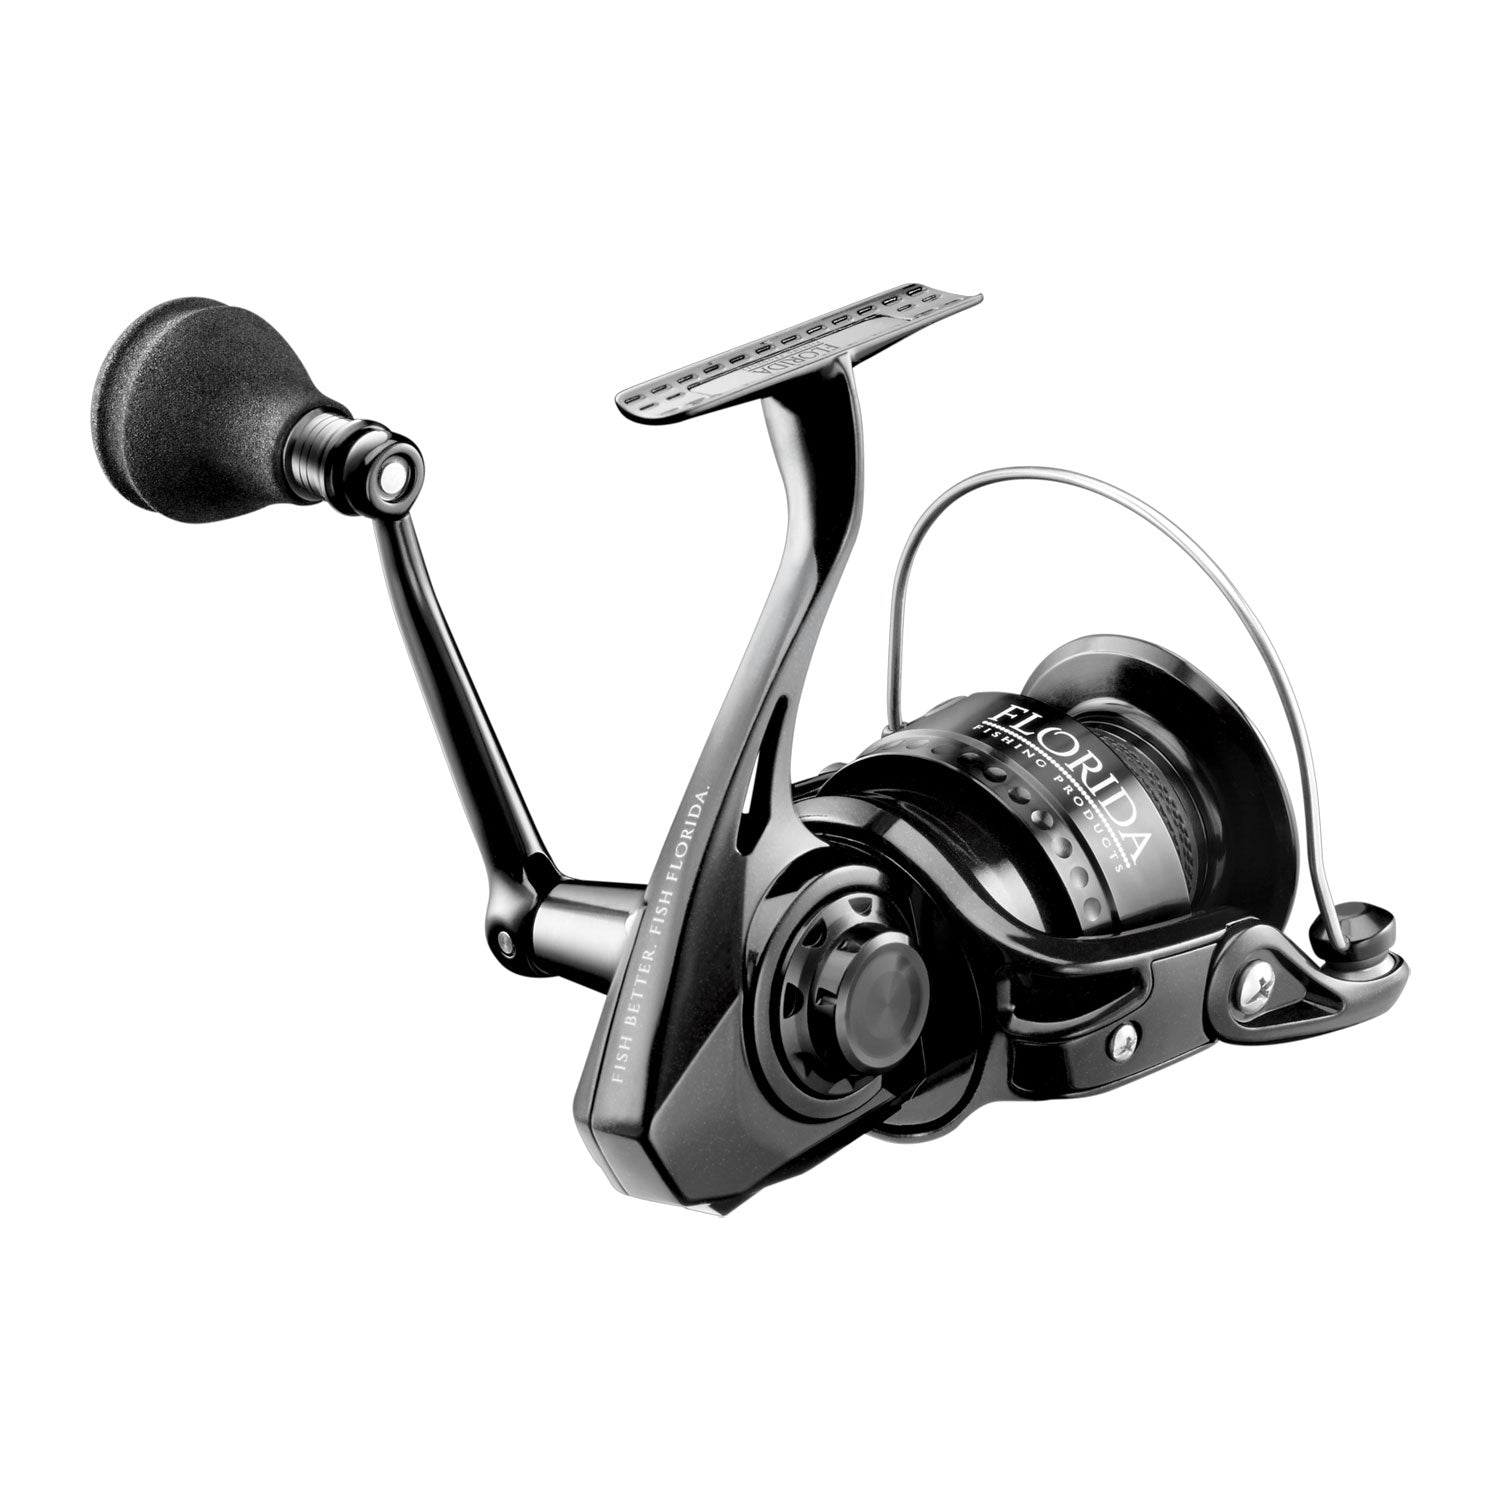 Florida Fishing Products Osprey SS Spinning Reel 4000 - Andy